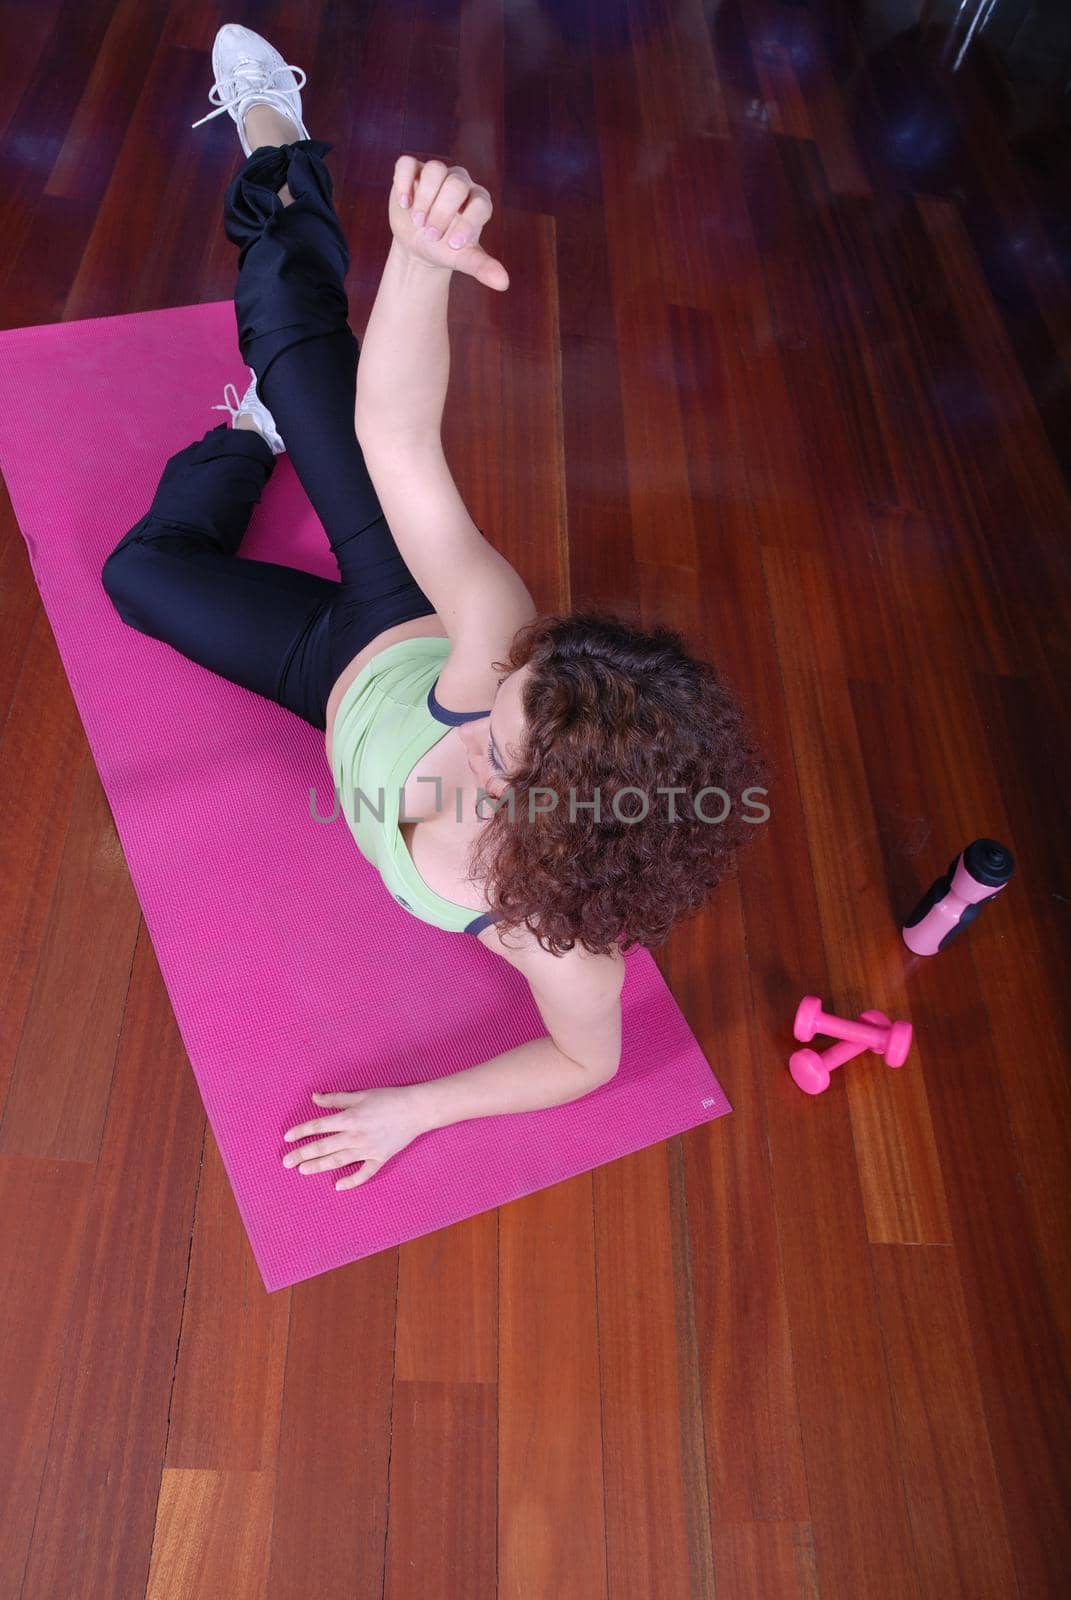 young pretty woman exercising in a fitness center